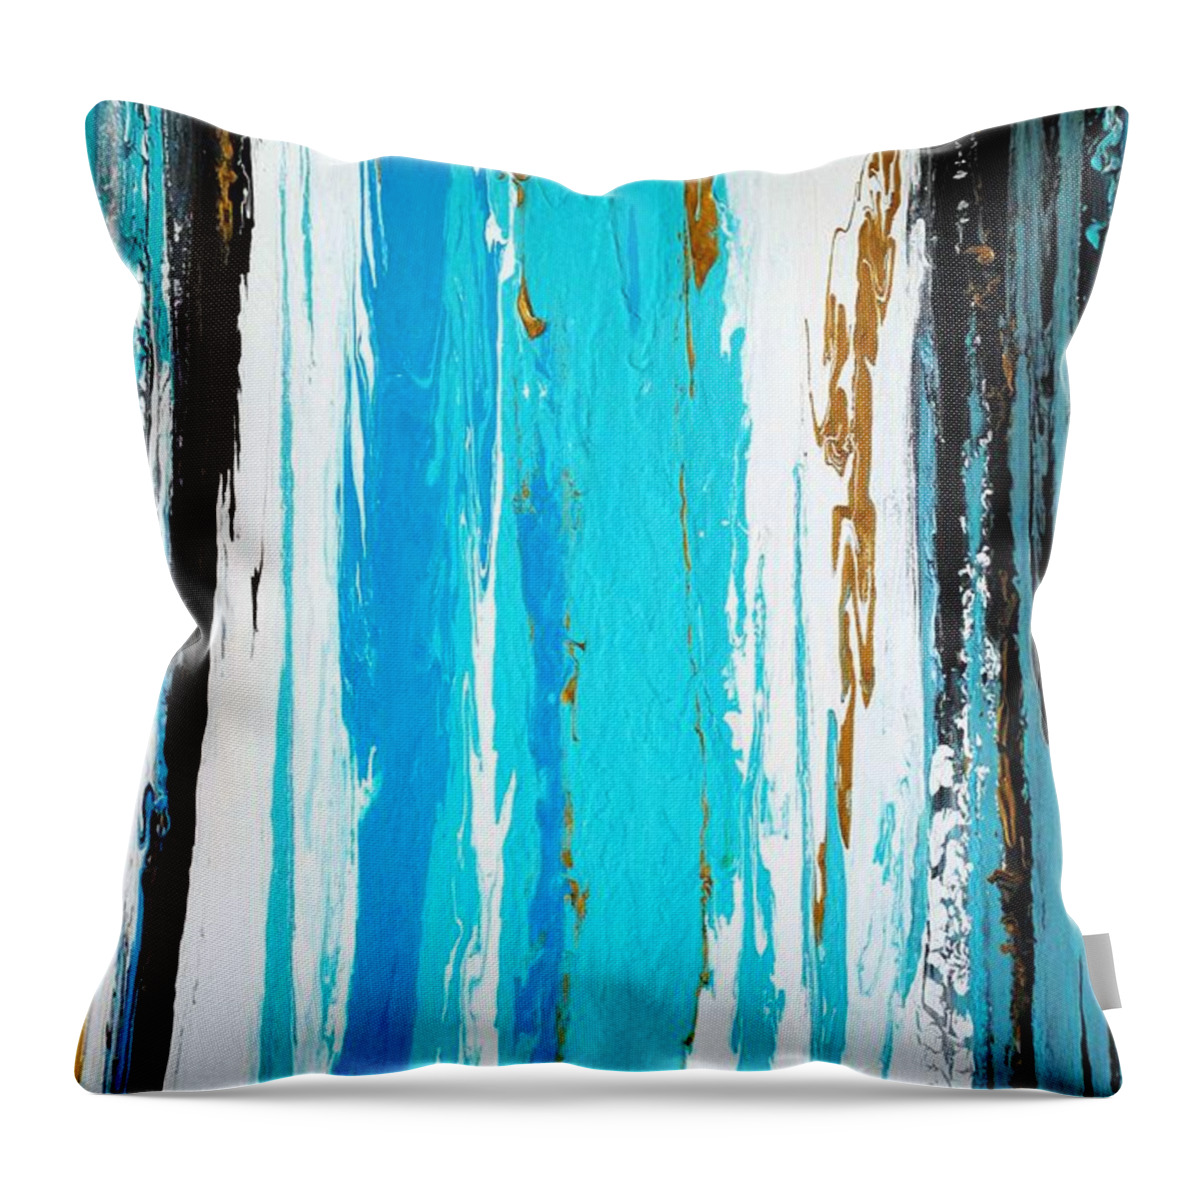 Contemporary Throw Pillow featuring the painting Go with the Flow by Sonali Kukreja